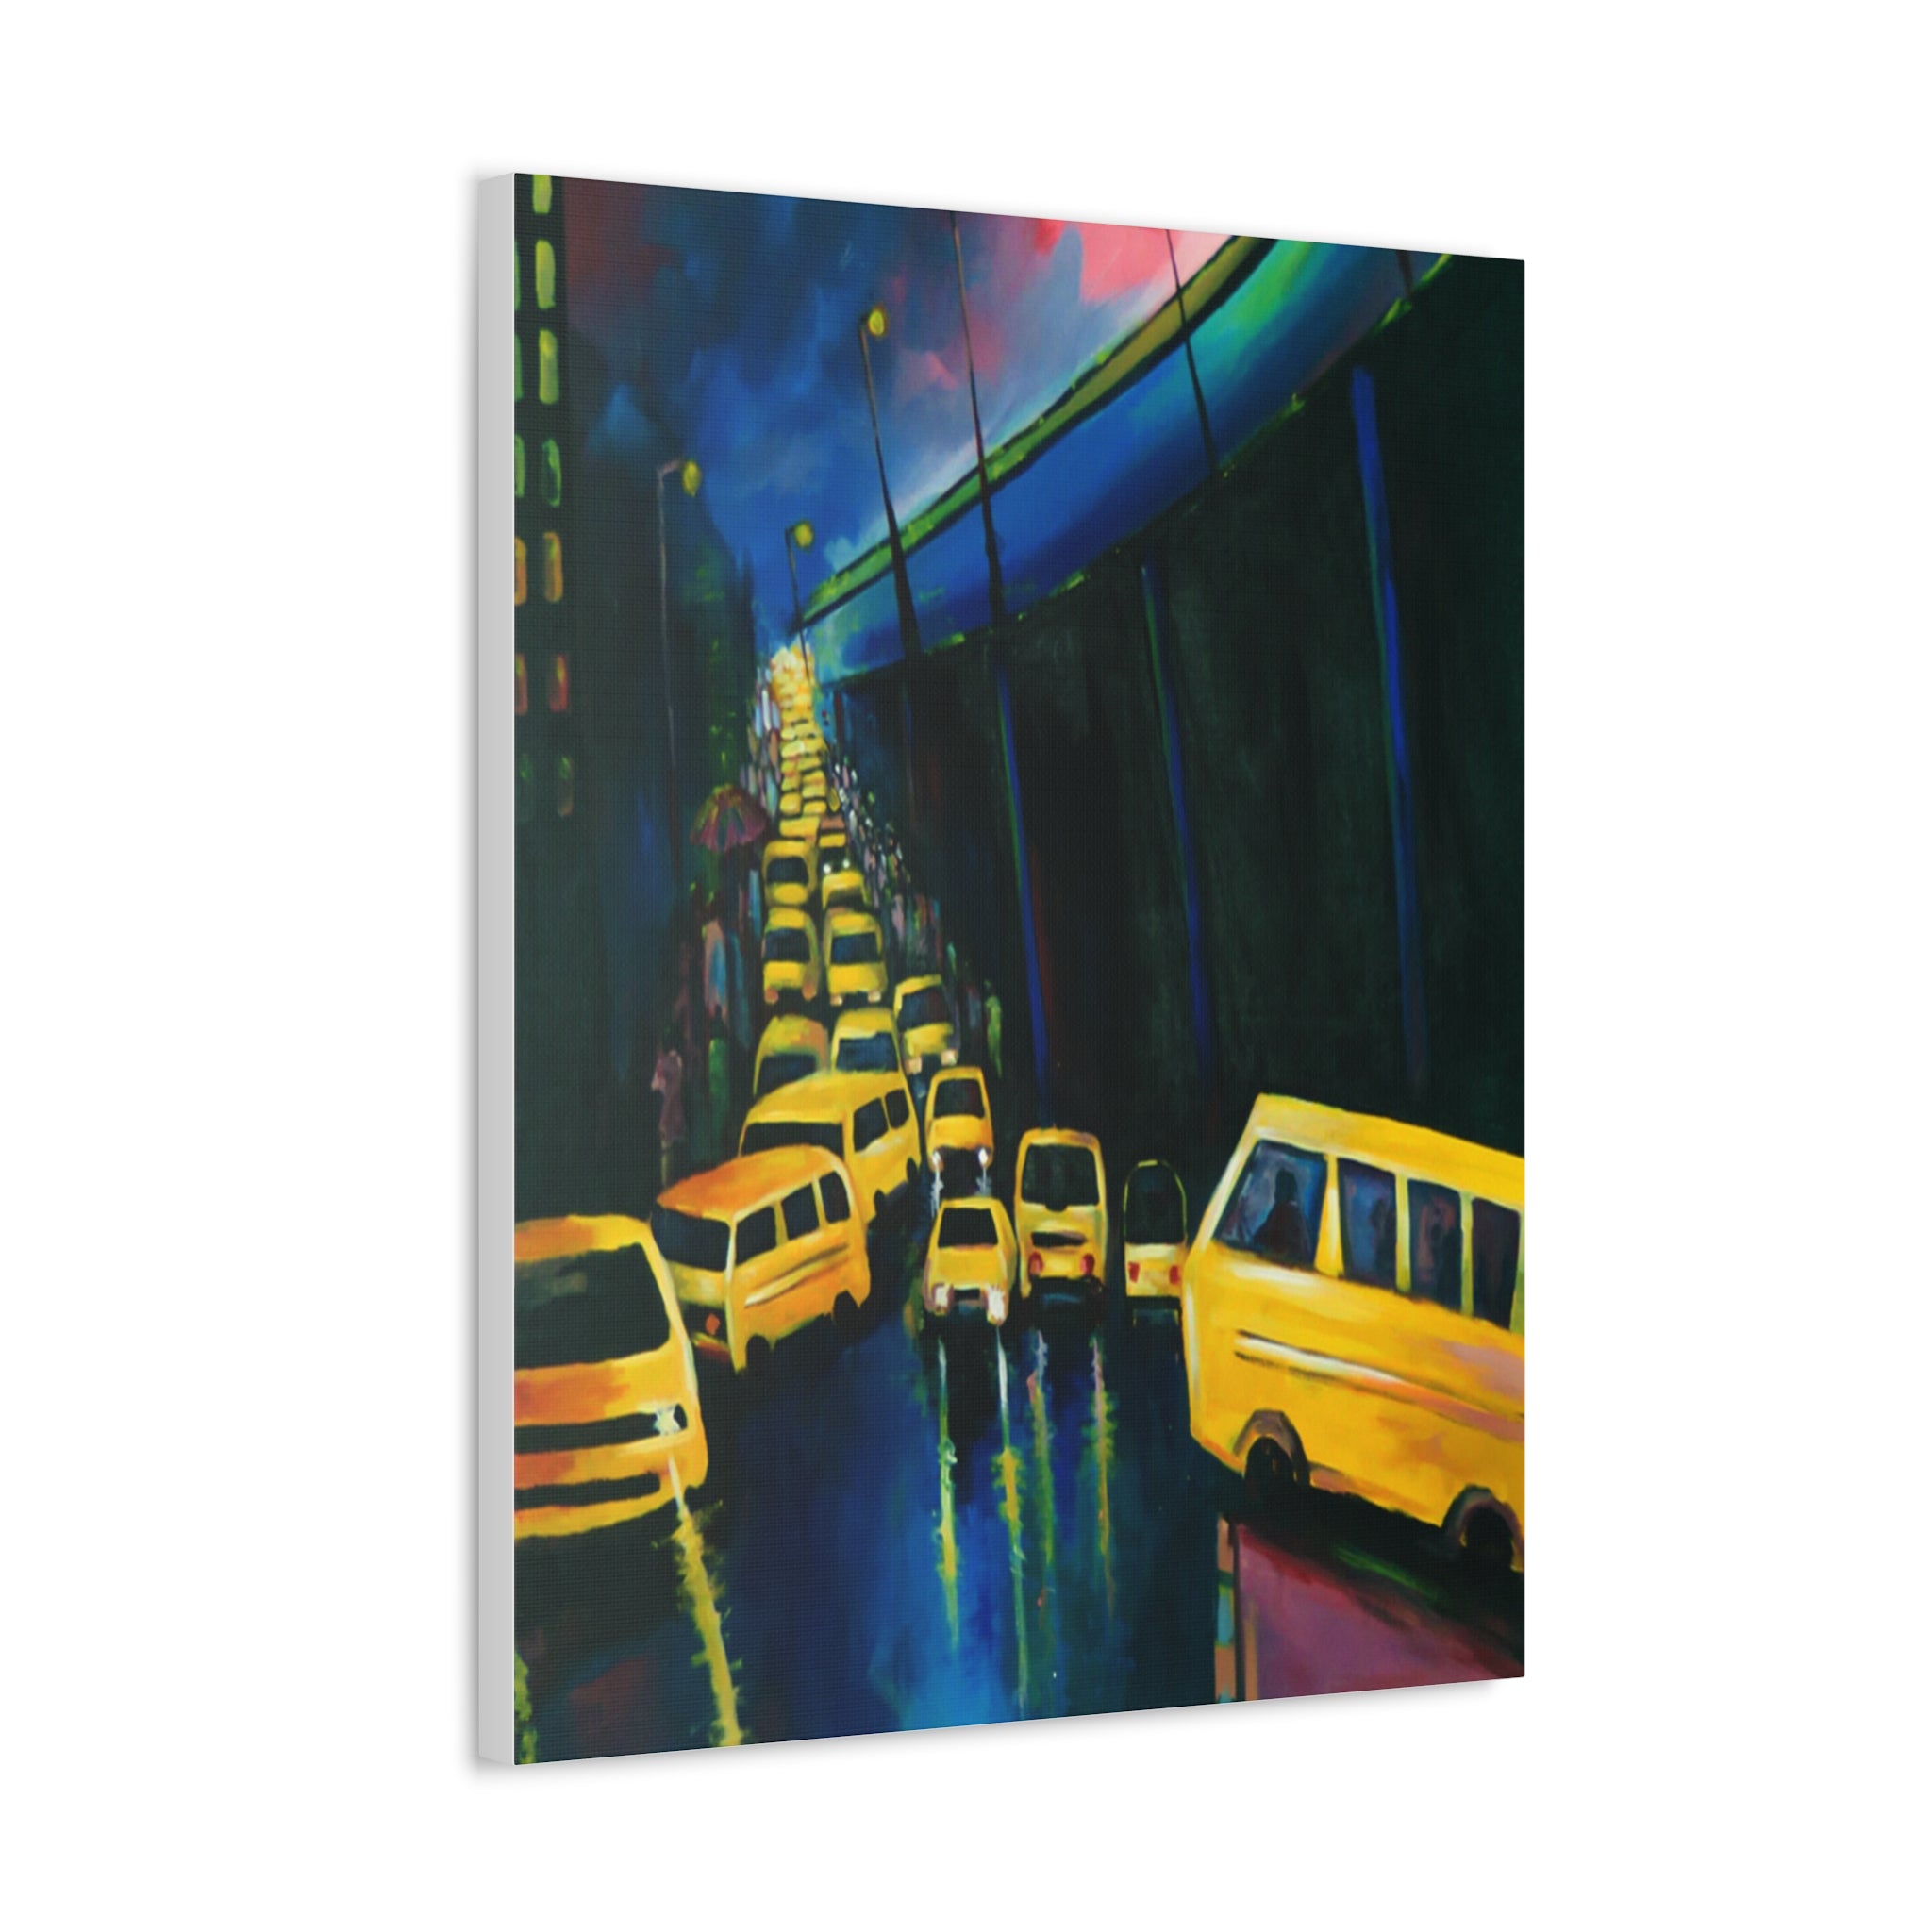 Yellow Buses in the City of Lagos Nigeria Wall Canvas - Bynelo